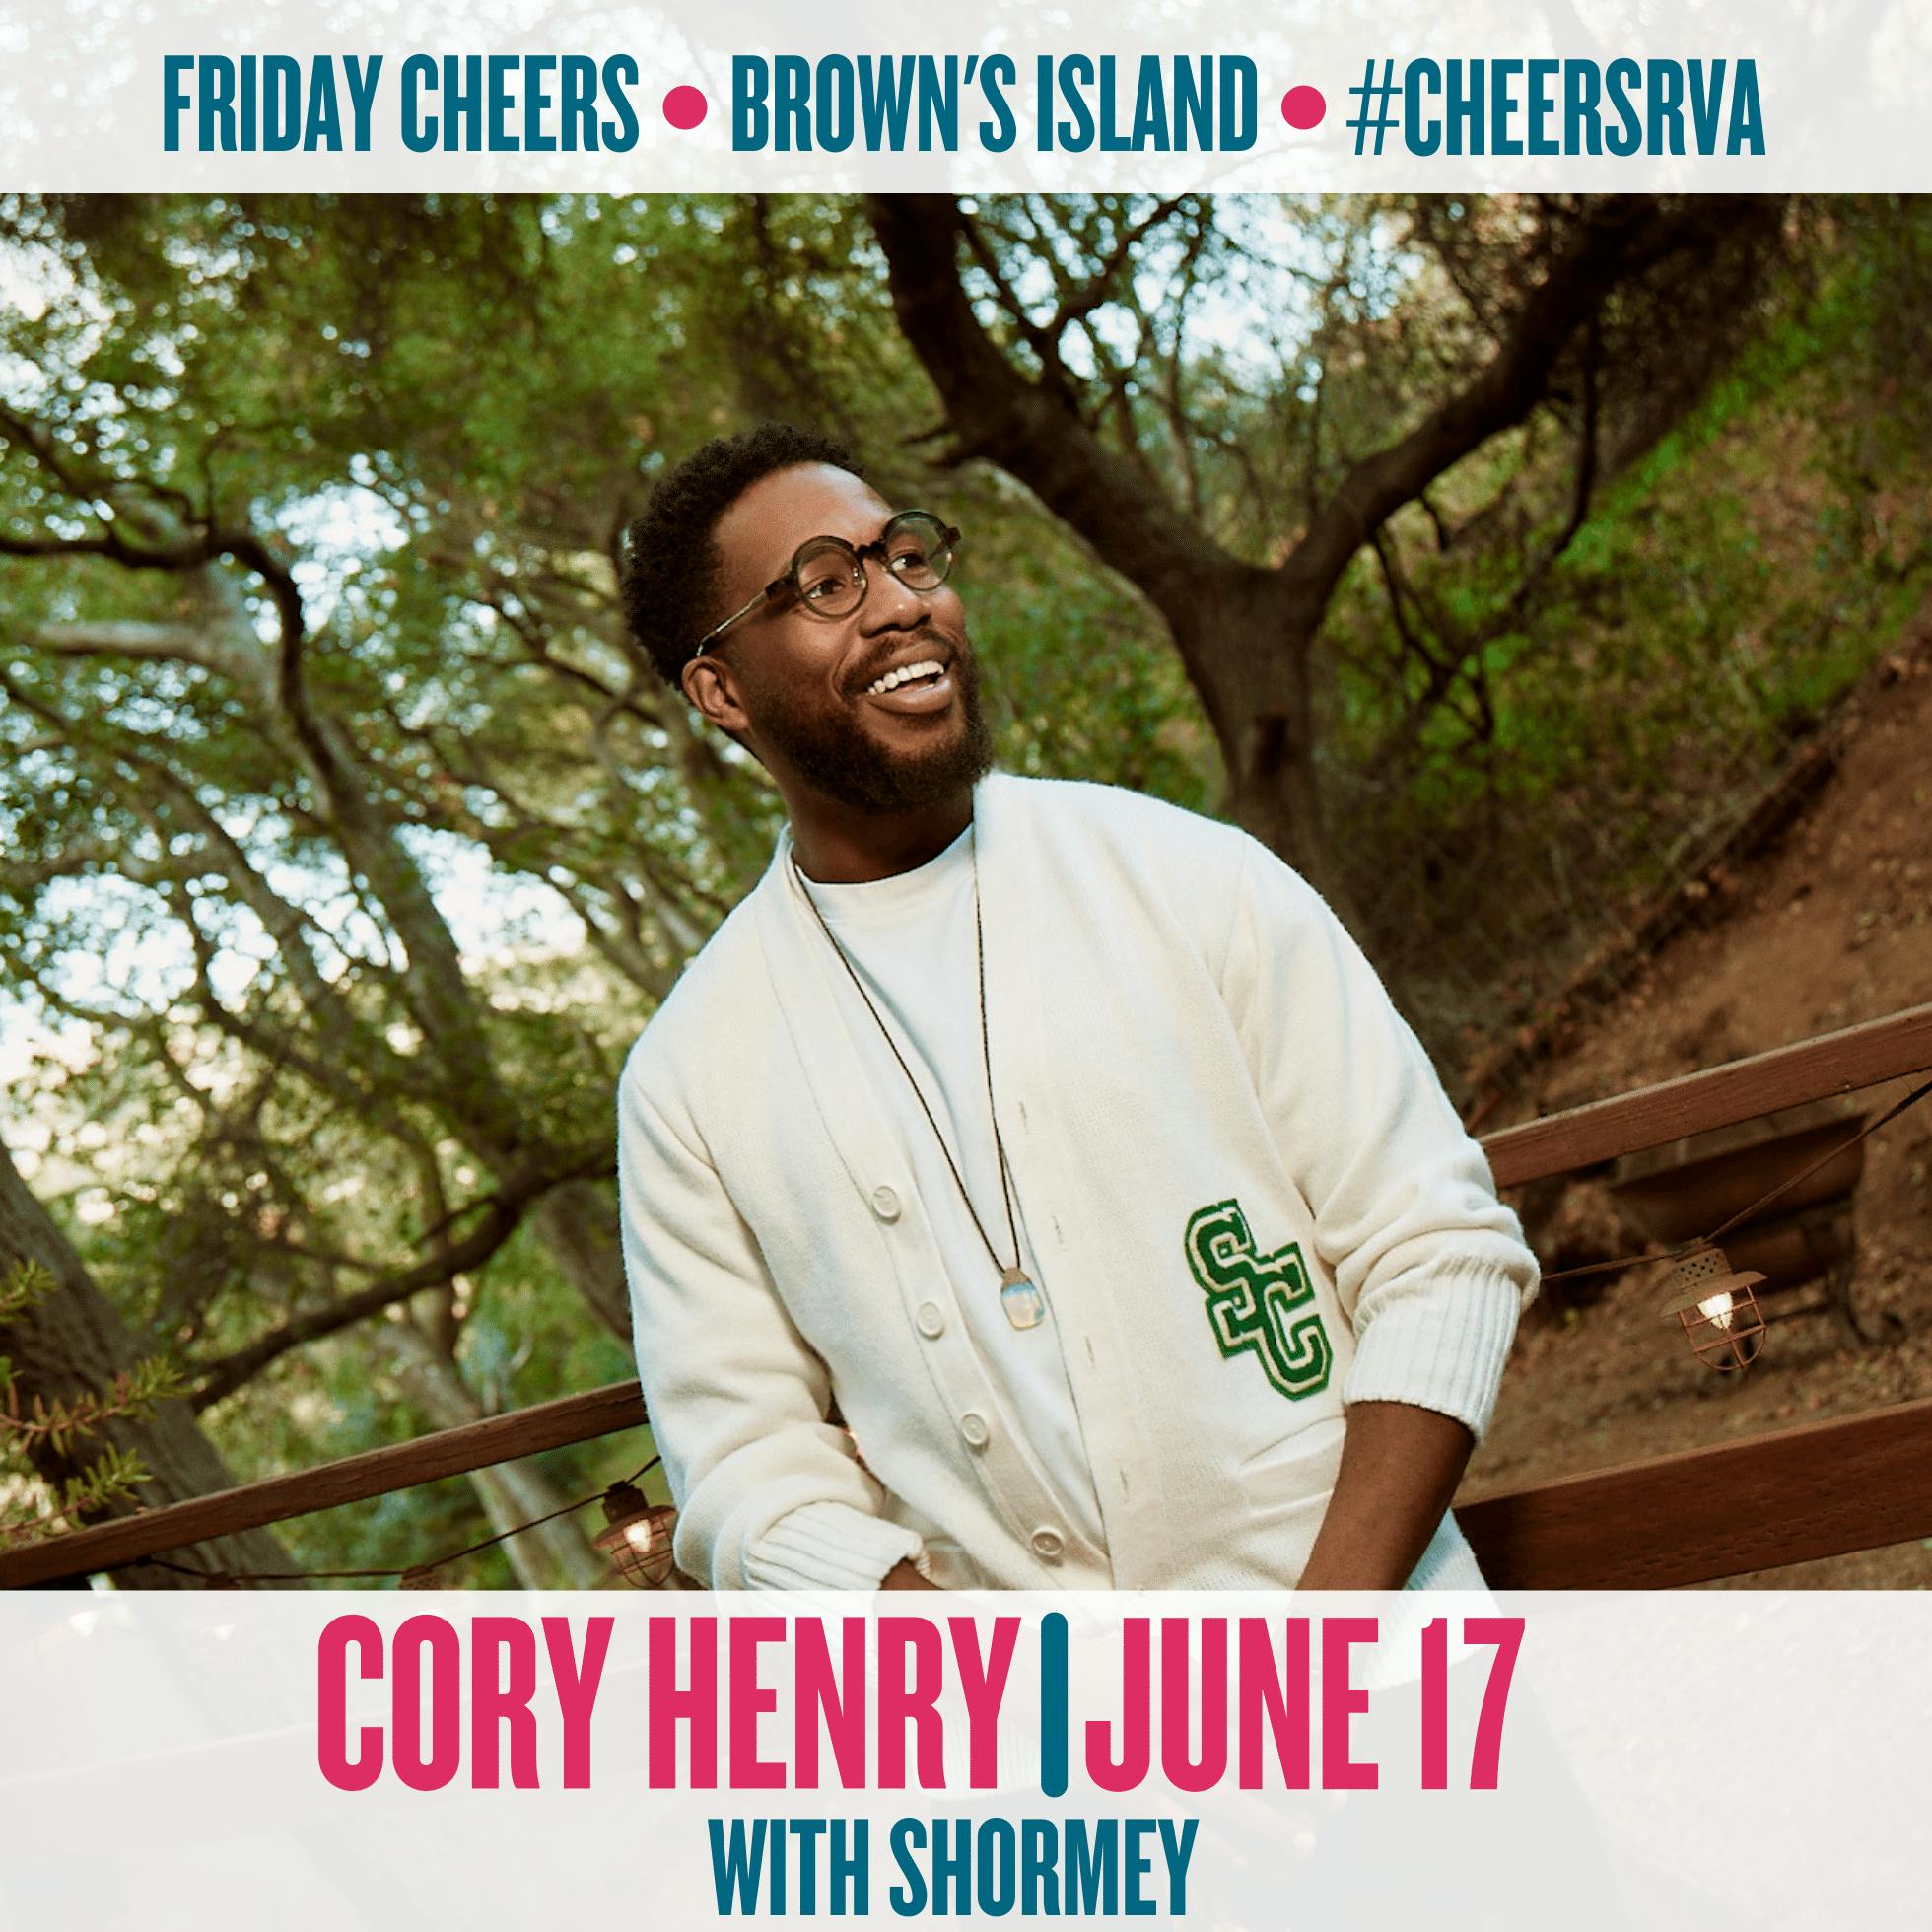 Cory Henry with Shormey at Friday Cheers in Richmond, Virginia